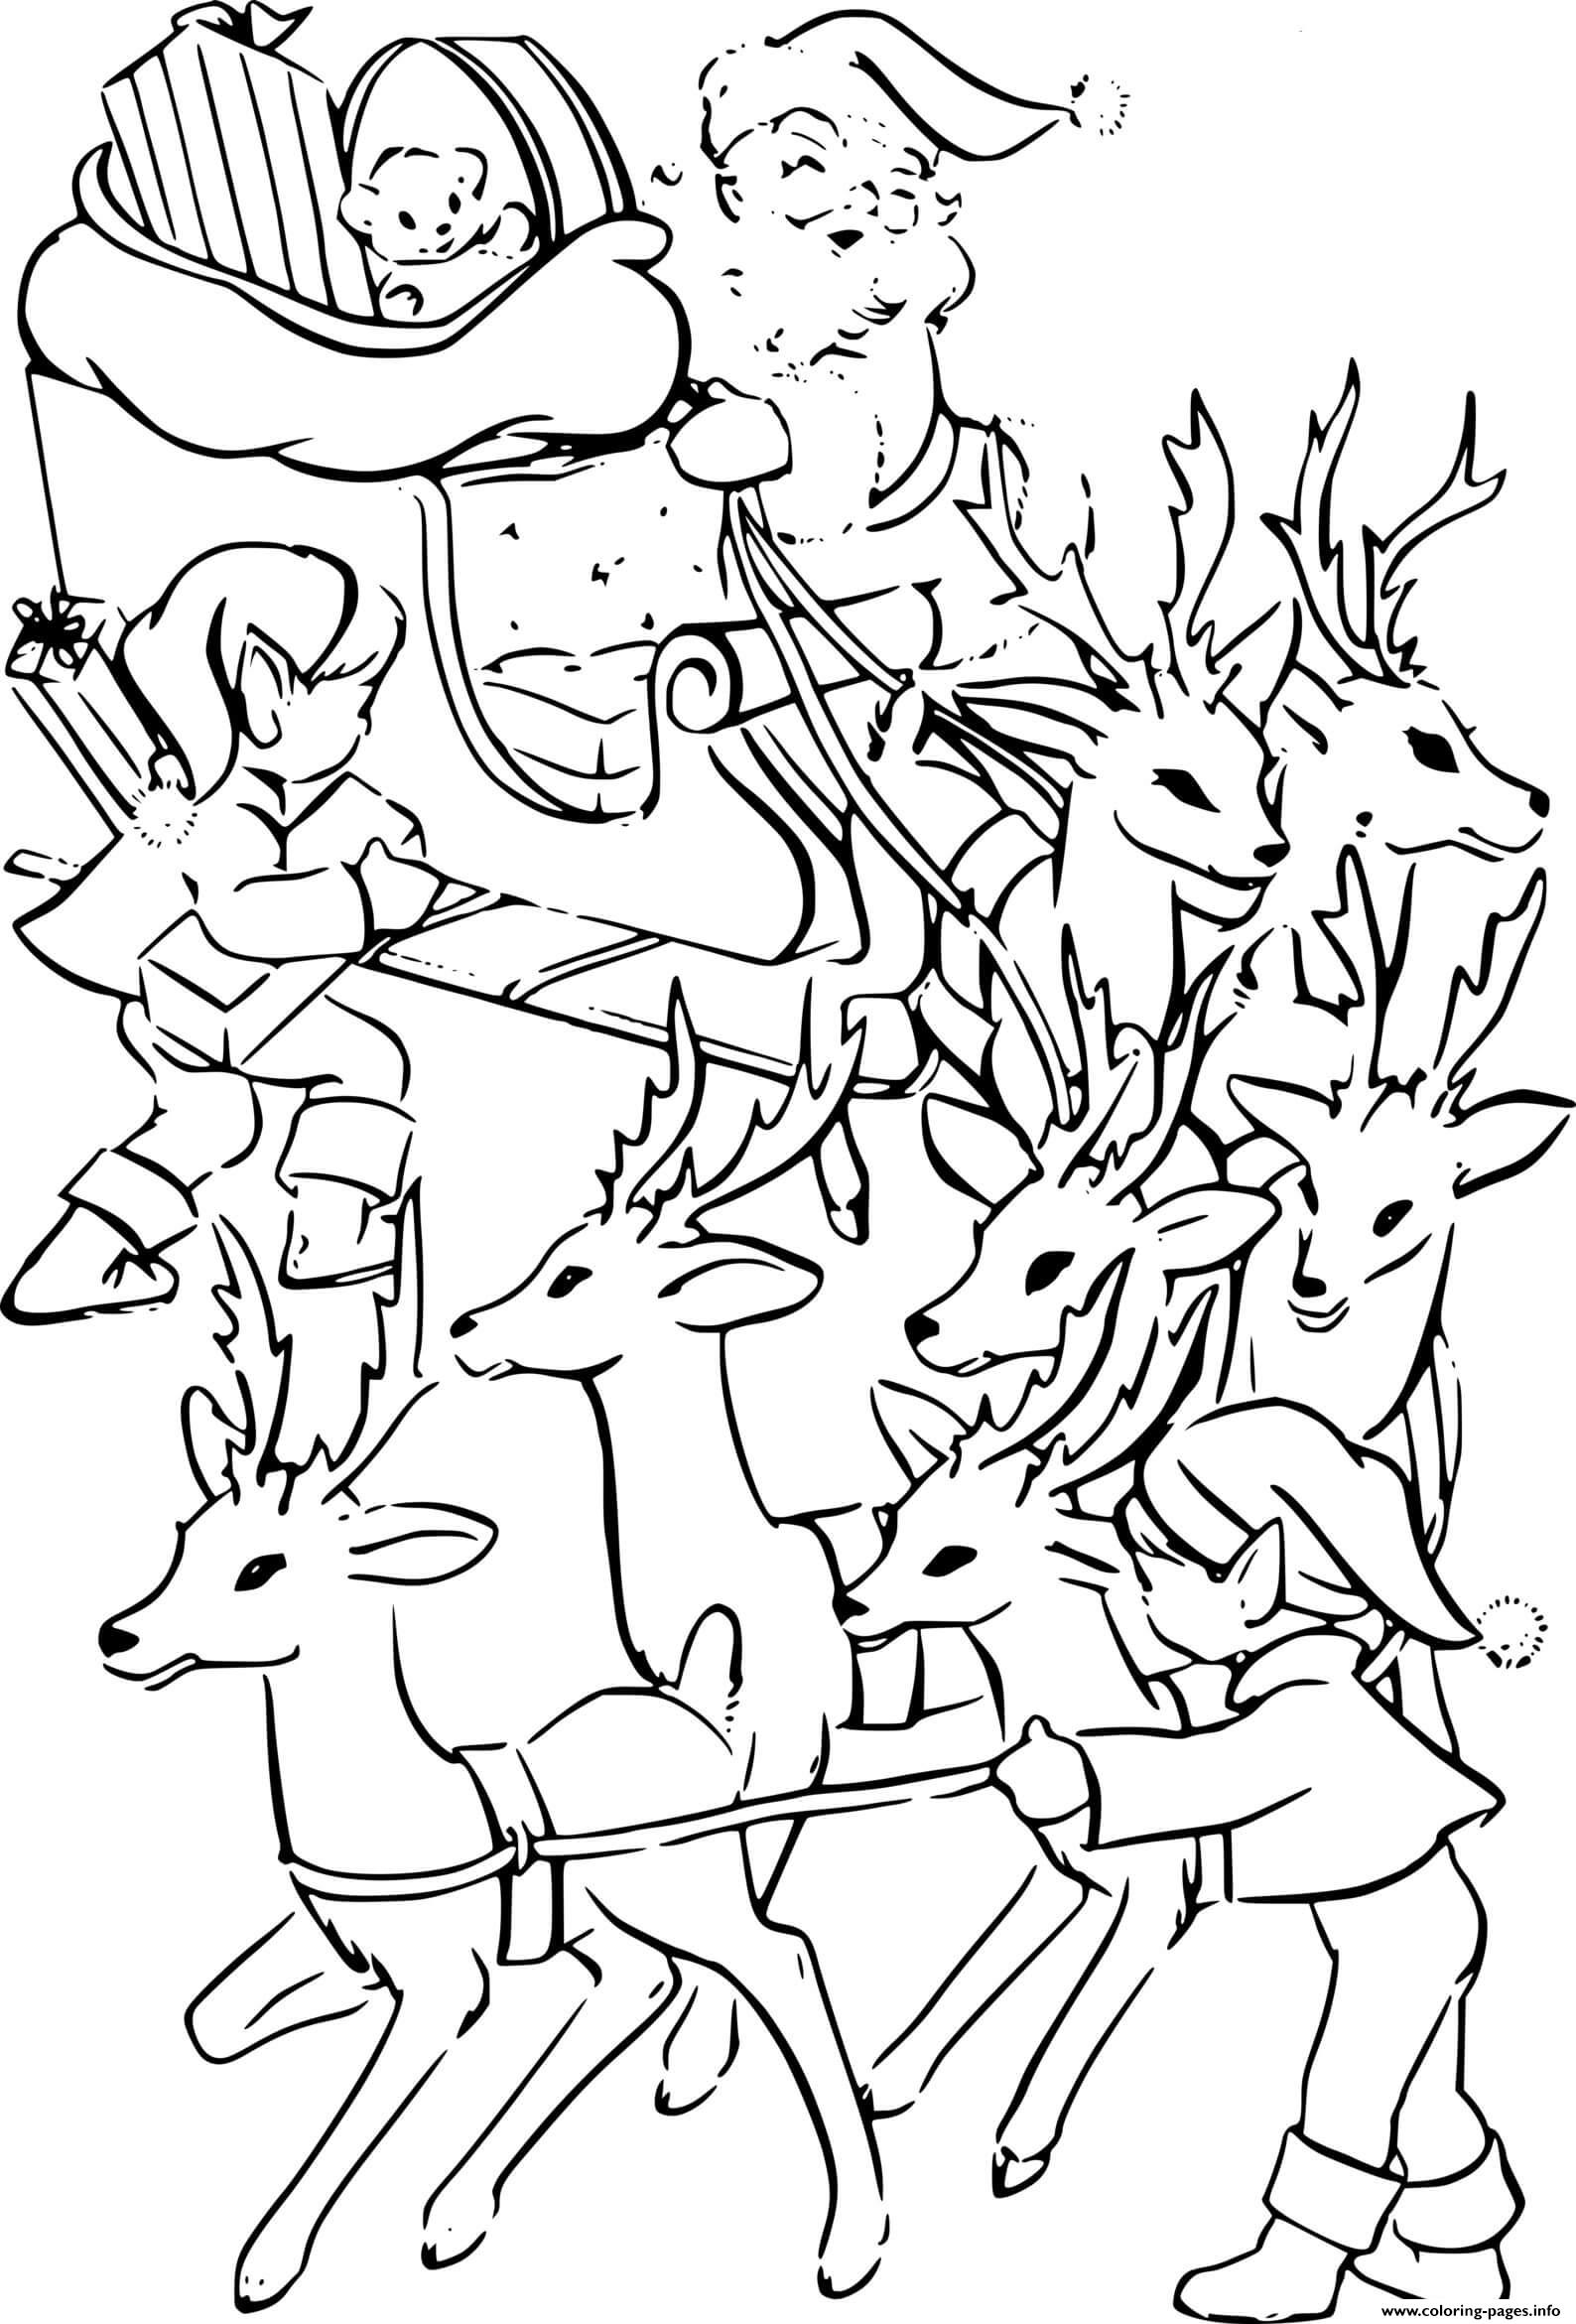 Seven Reindeer Pull The Sleigh coloring